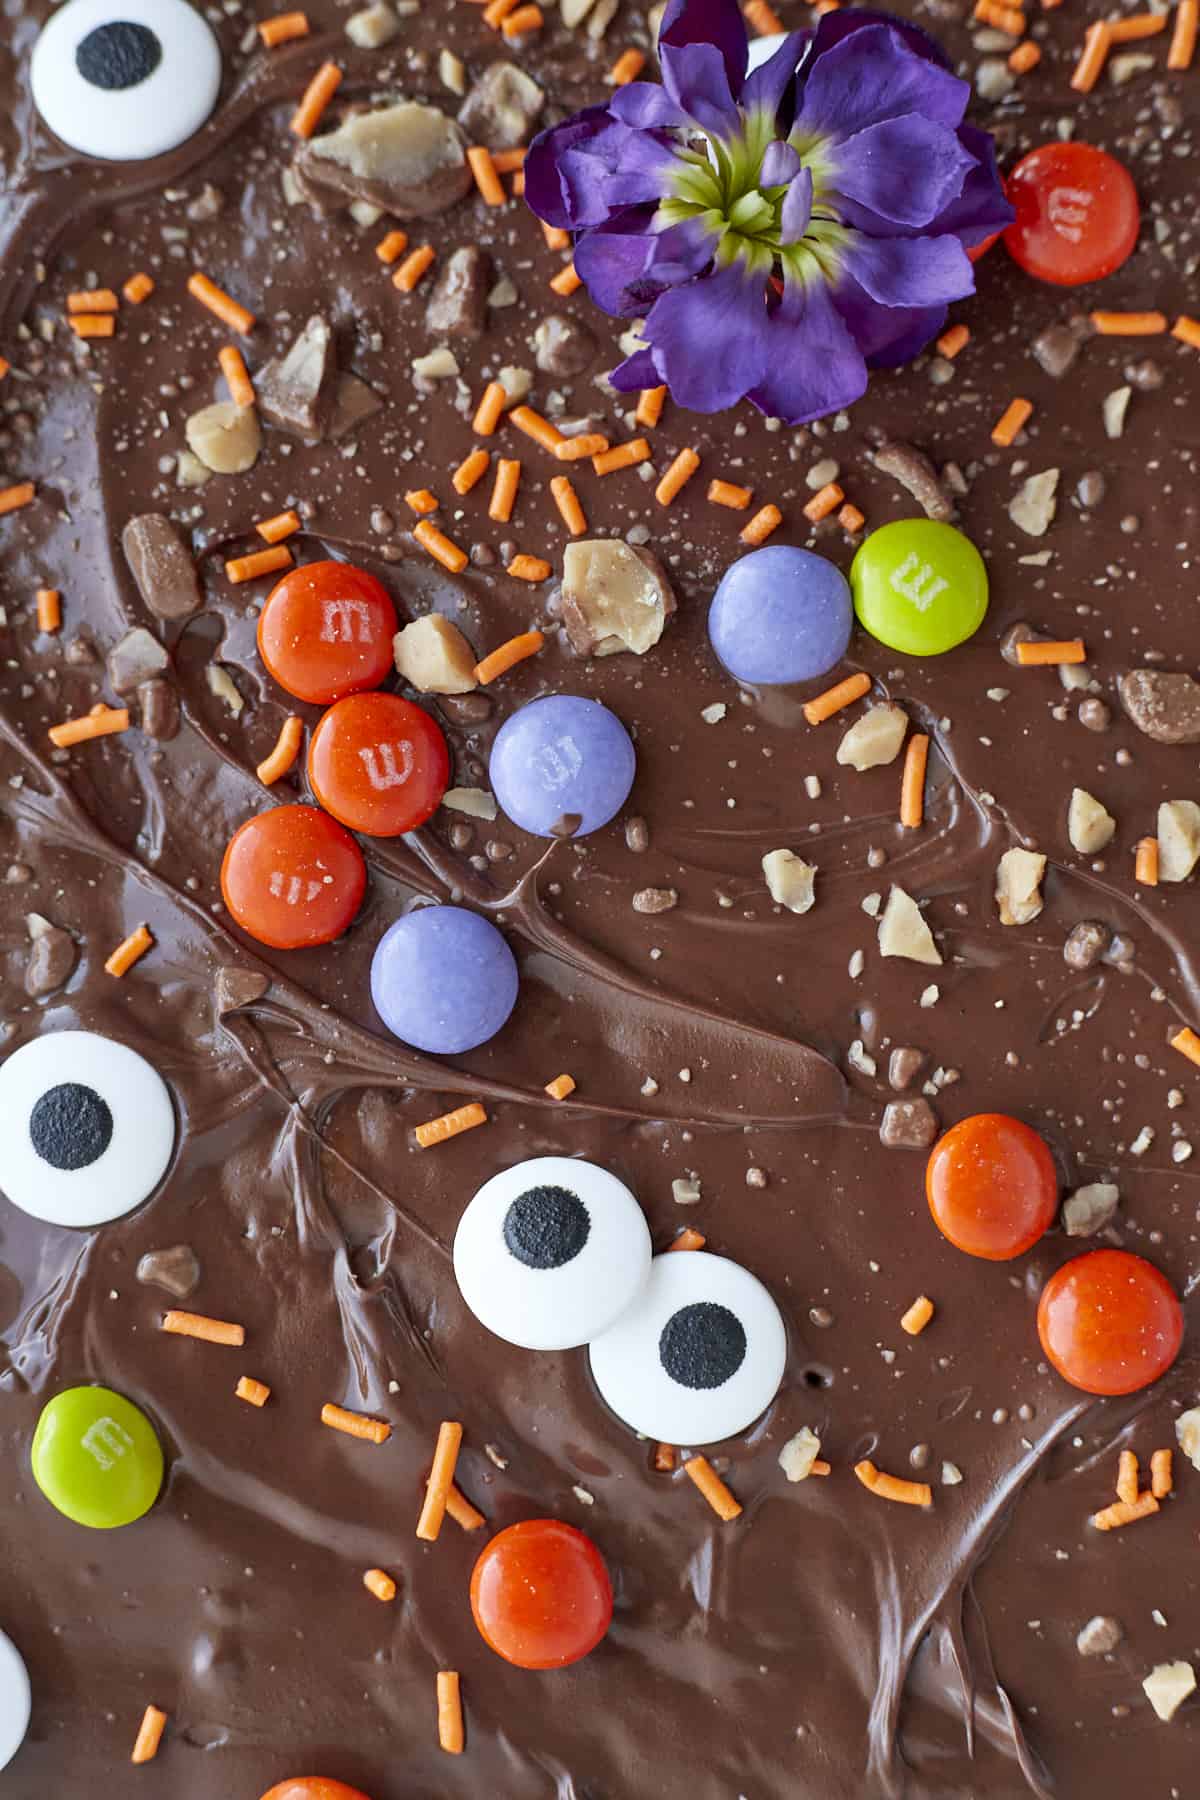 close up image of Halloween crack candy decorated with m&ms, candy eyeballs, toffee bits, and orange sprinkles